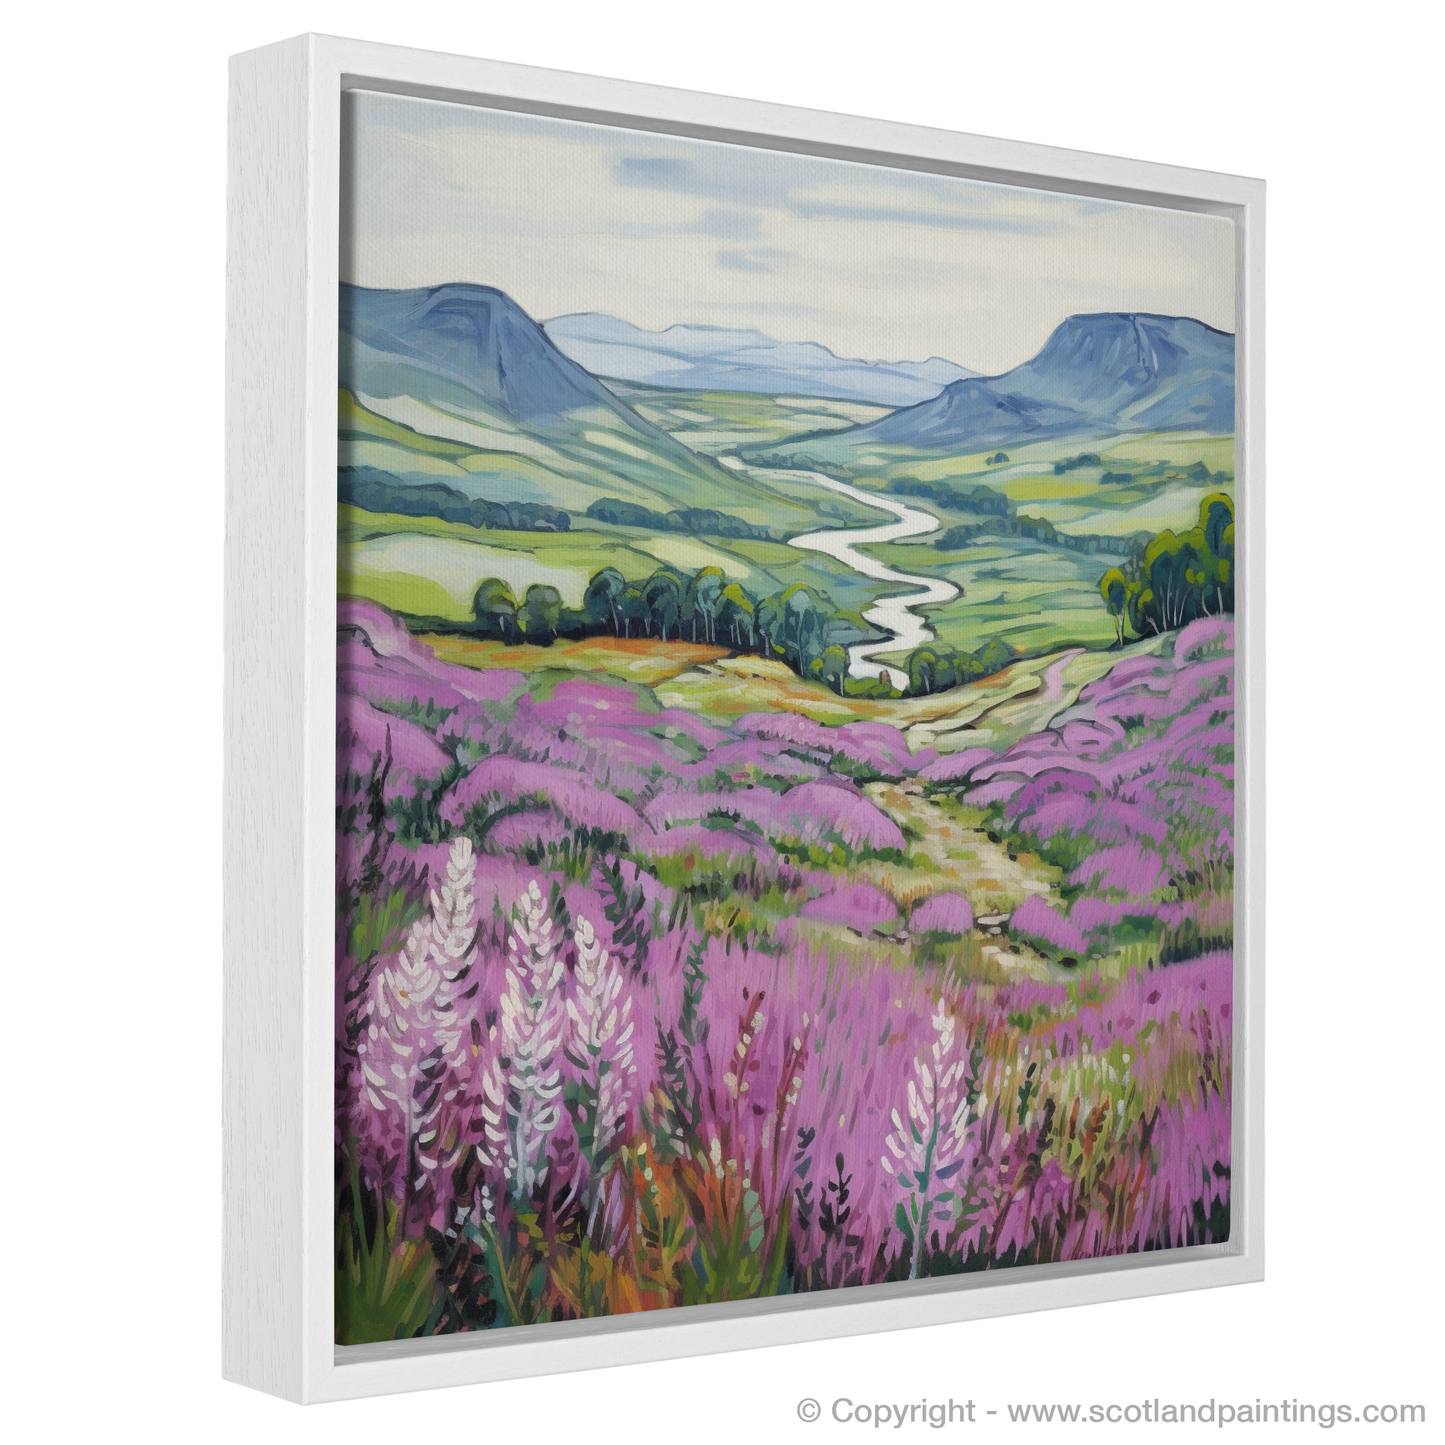 Heather Haven: A Naive Art Tribute to Cairngorms' Wilds